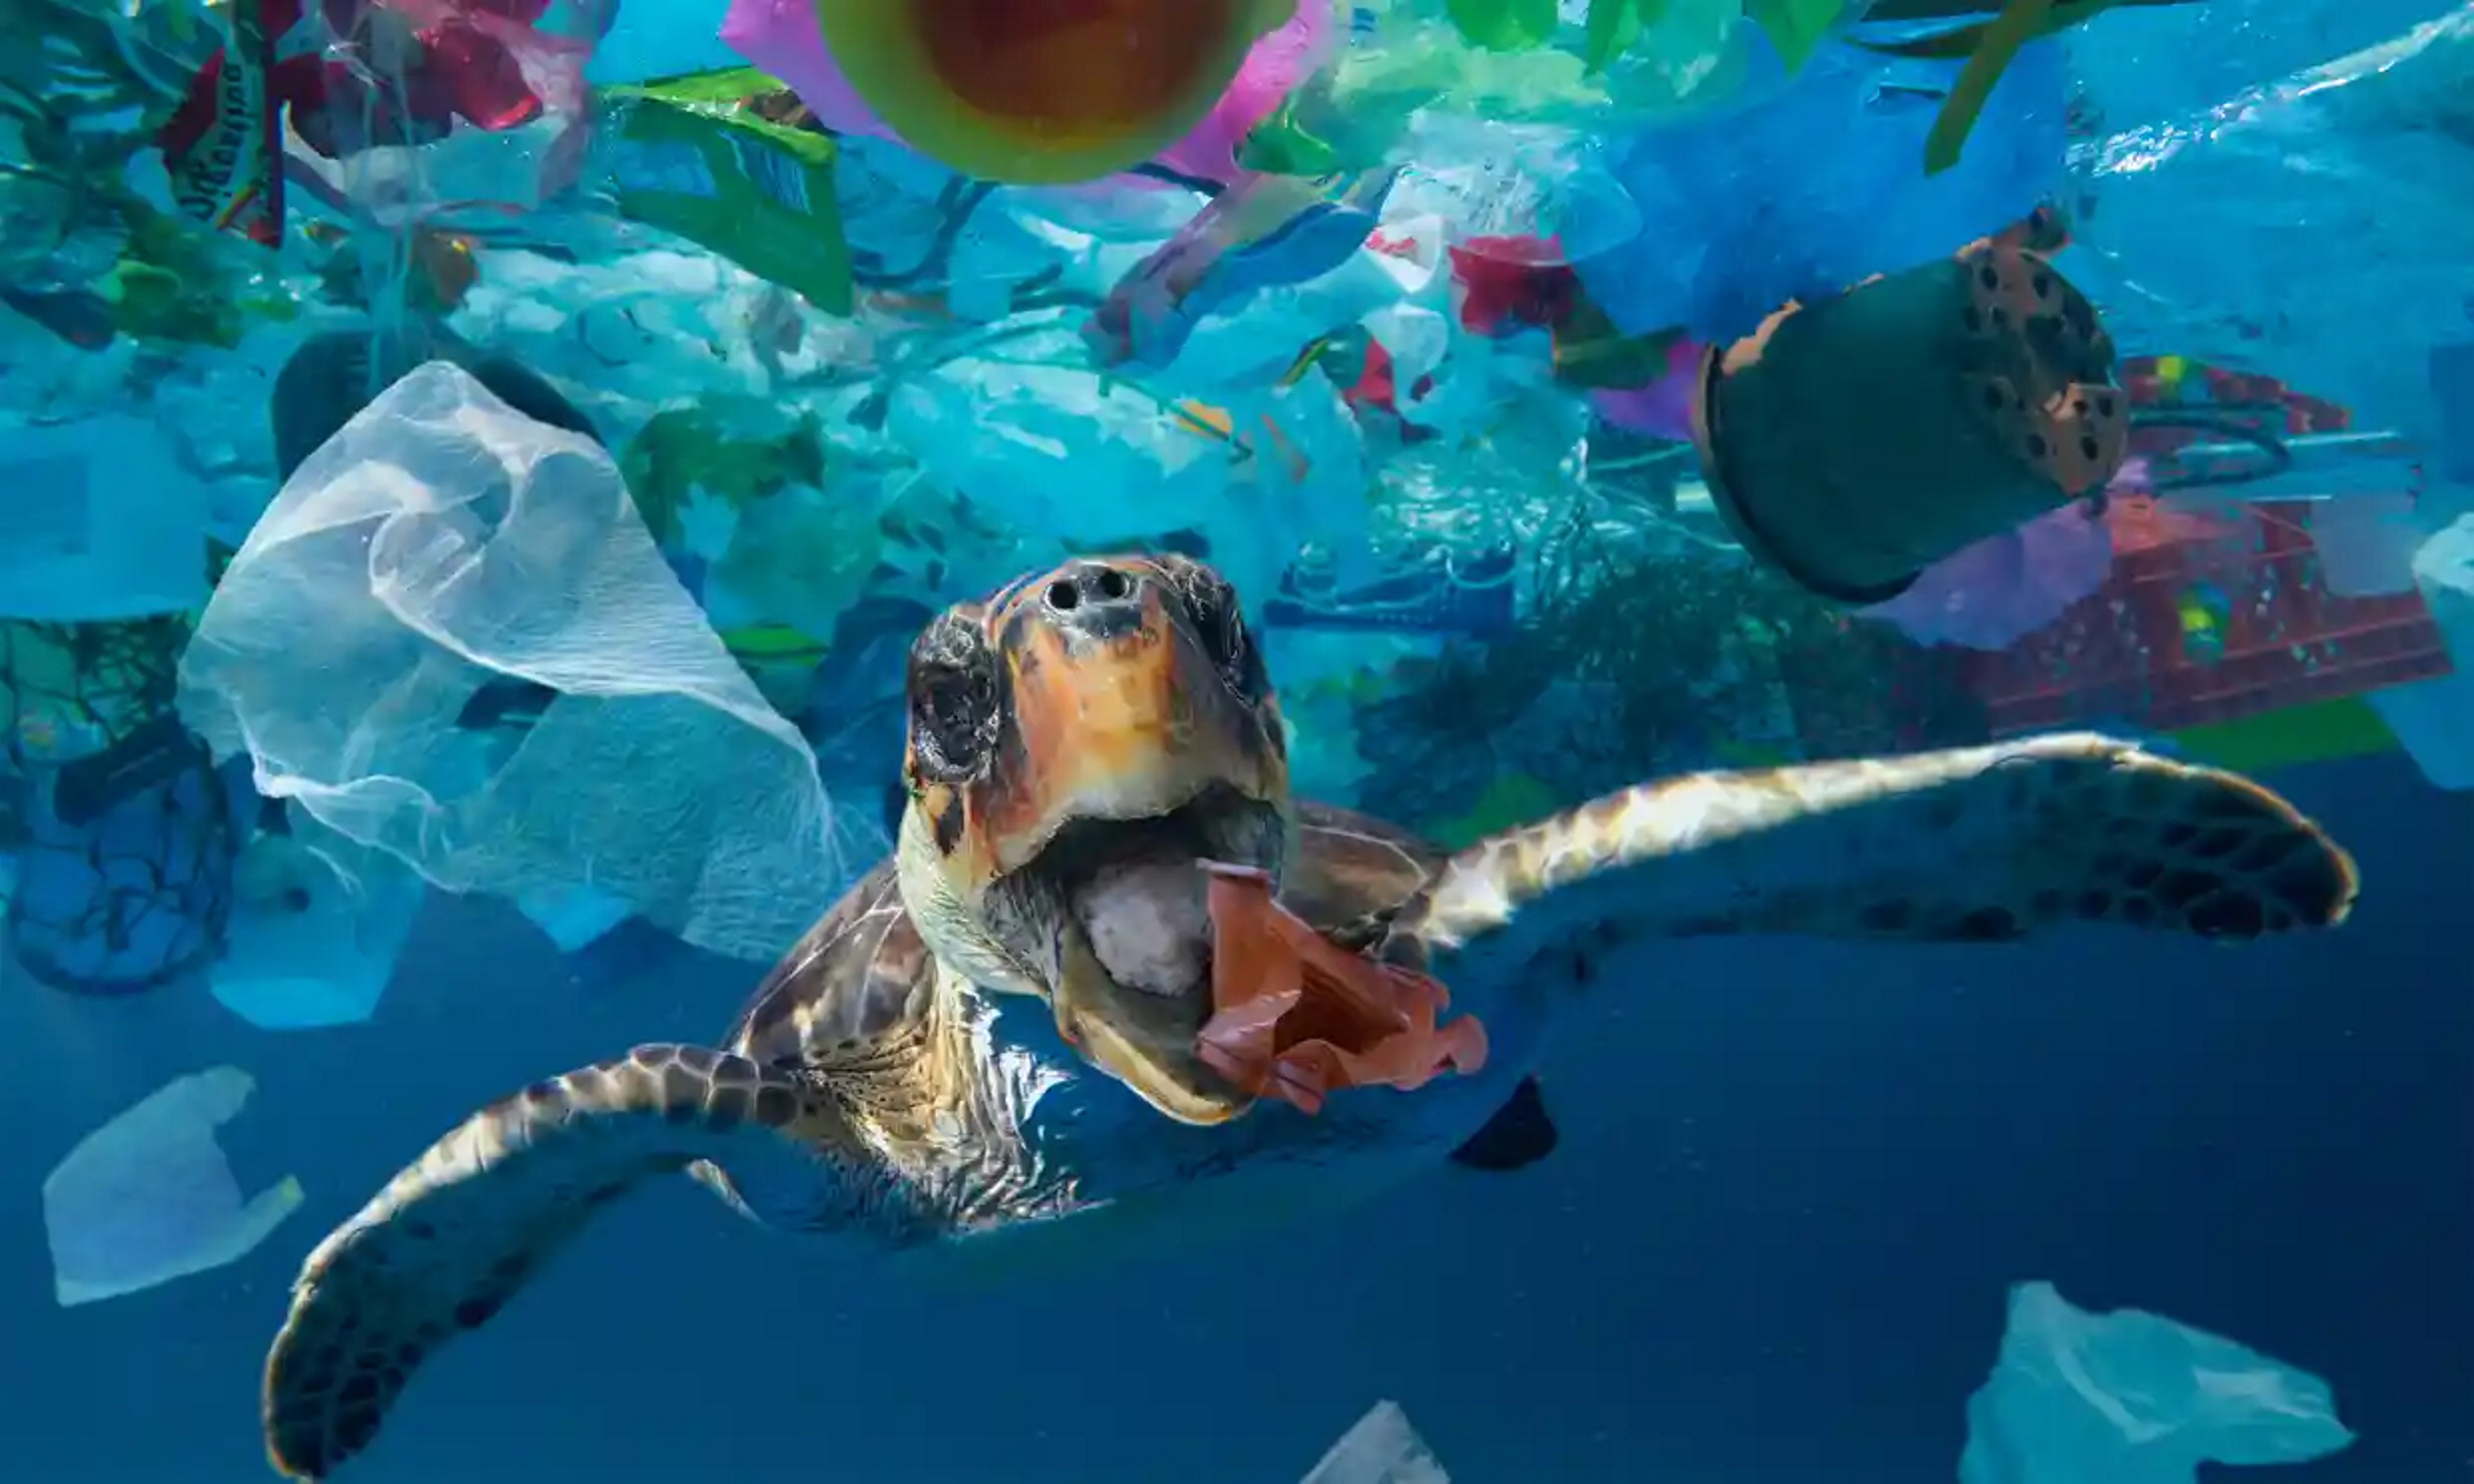 A sea turtle tries to eat a plastic cup: consumer items such as food containers make up the largest share of litter origins, according to a study published in the journal Nature Sustainability and funded by the BBVA Foundation and Spanish science ministry. The study concluded: “In terms of litter origins, take-out consumer items – mainly plastic bags and wrappers, food containers and cutlery, plastic and glass bottles, and cans – made up the largest share.” Photograph: Paulo Oliveira / Alamy Stock Photo